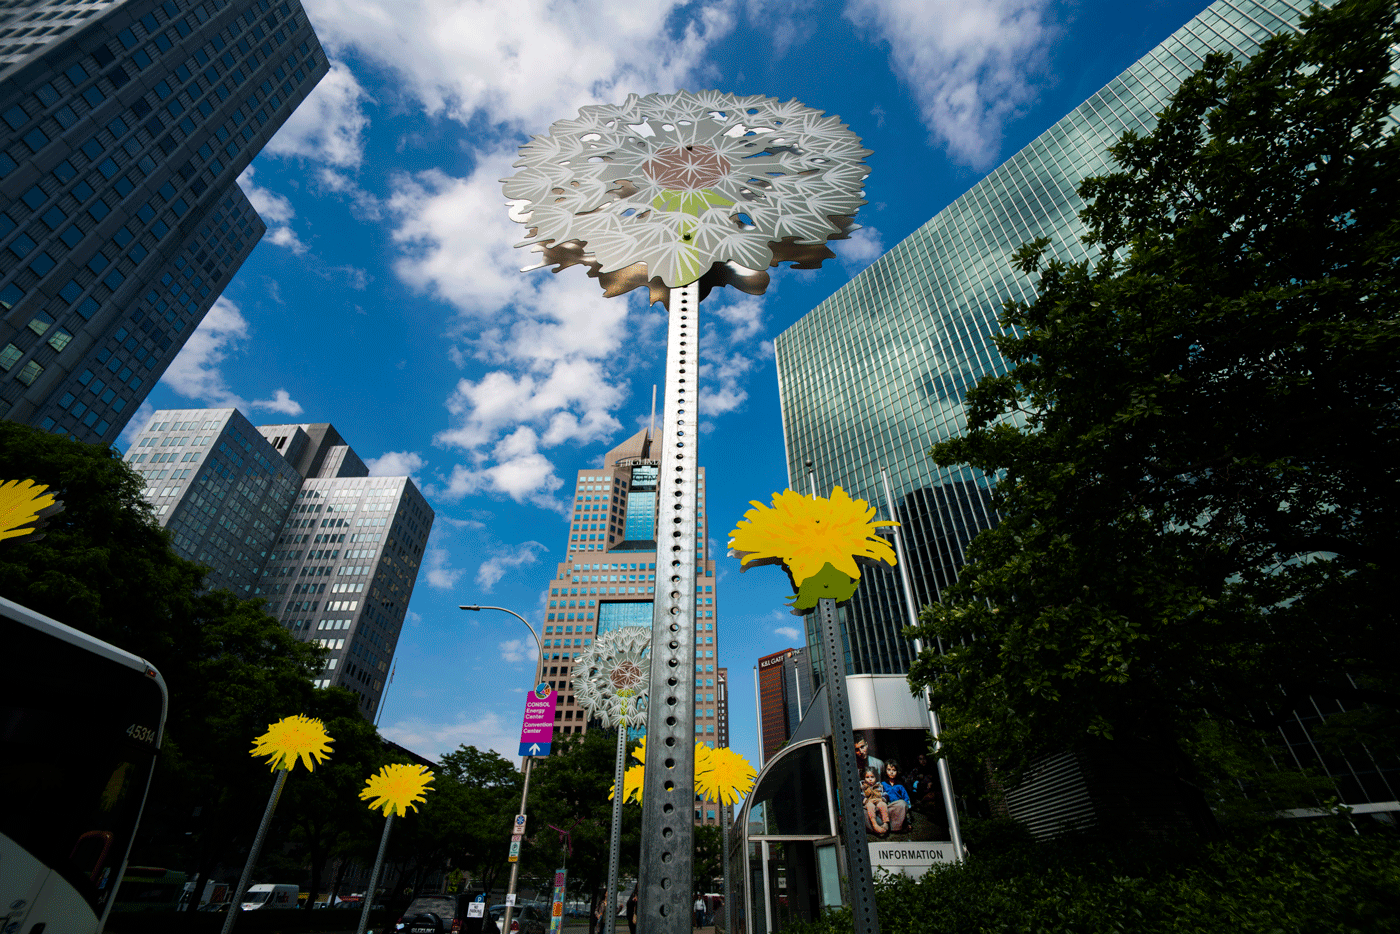 Dandelion sculptures stand in front of the city skyline